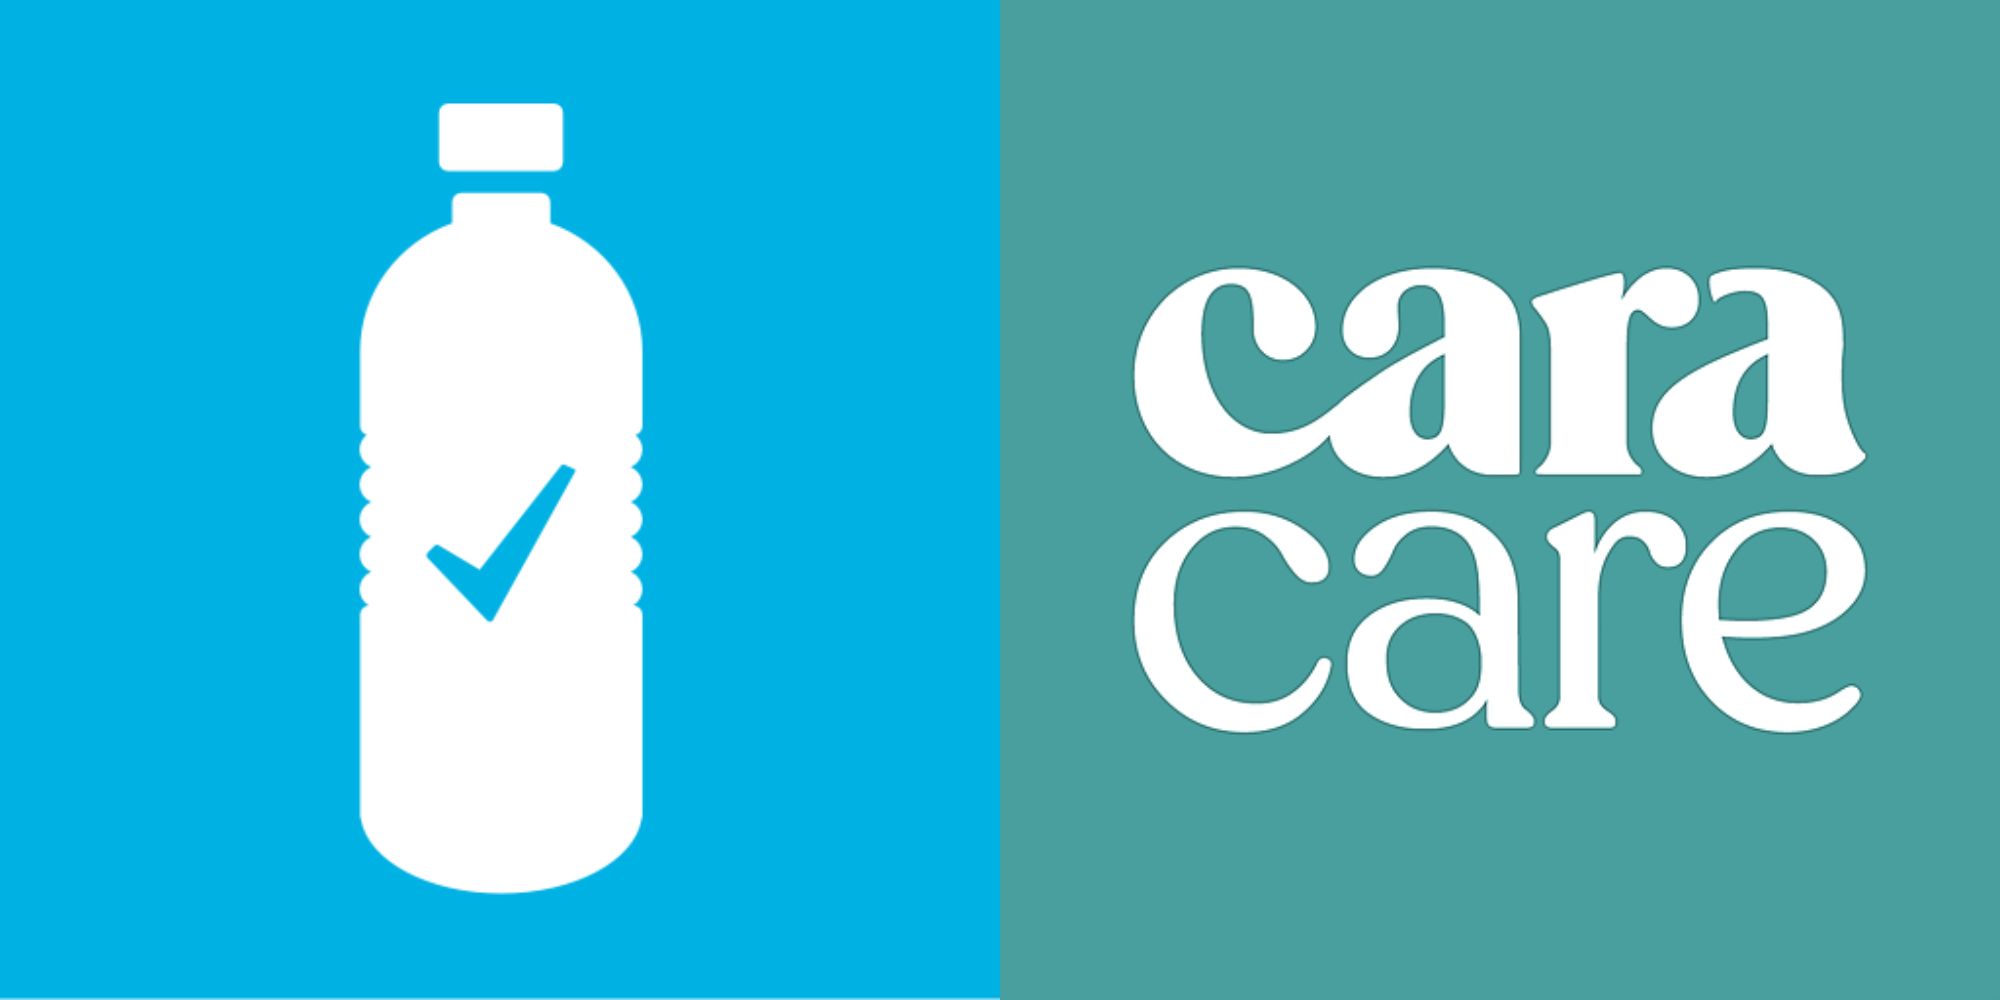 Split image showing the Waterlogged and CaraCare app logos.